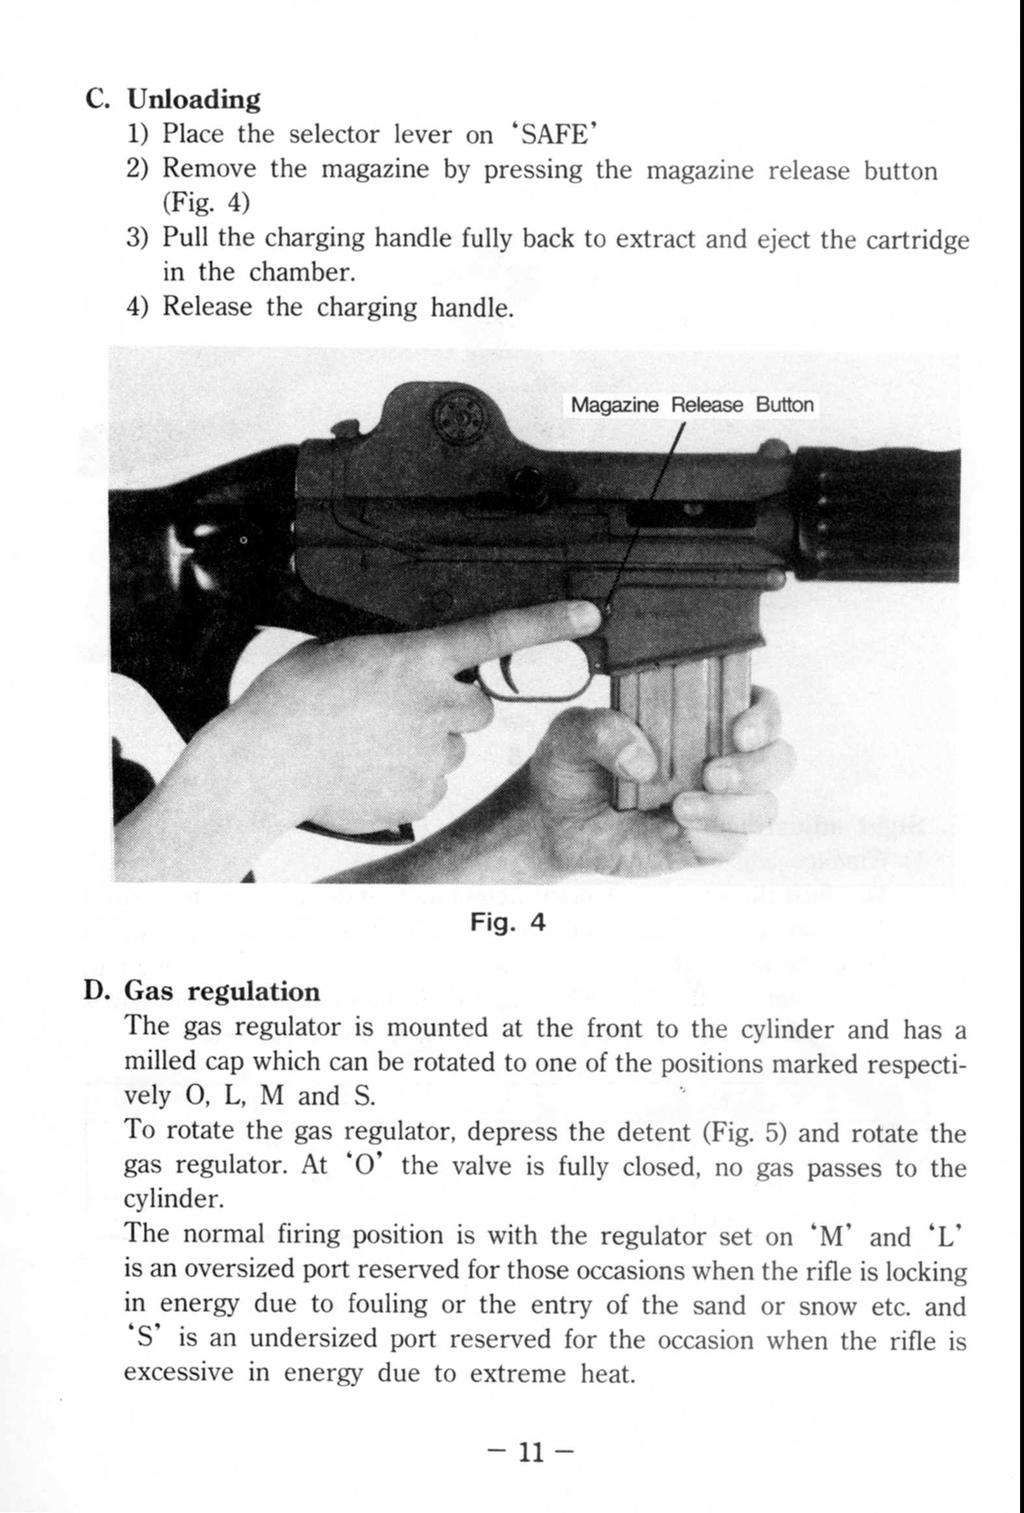 C. Unloading 1) Place the selector lever on 'SAFE' 2) Remove the magazine by pressing the magazine release button (Fig.